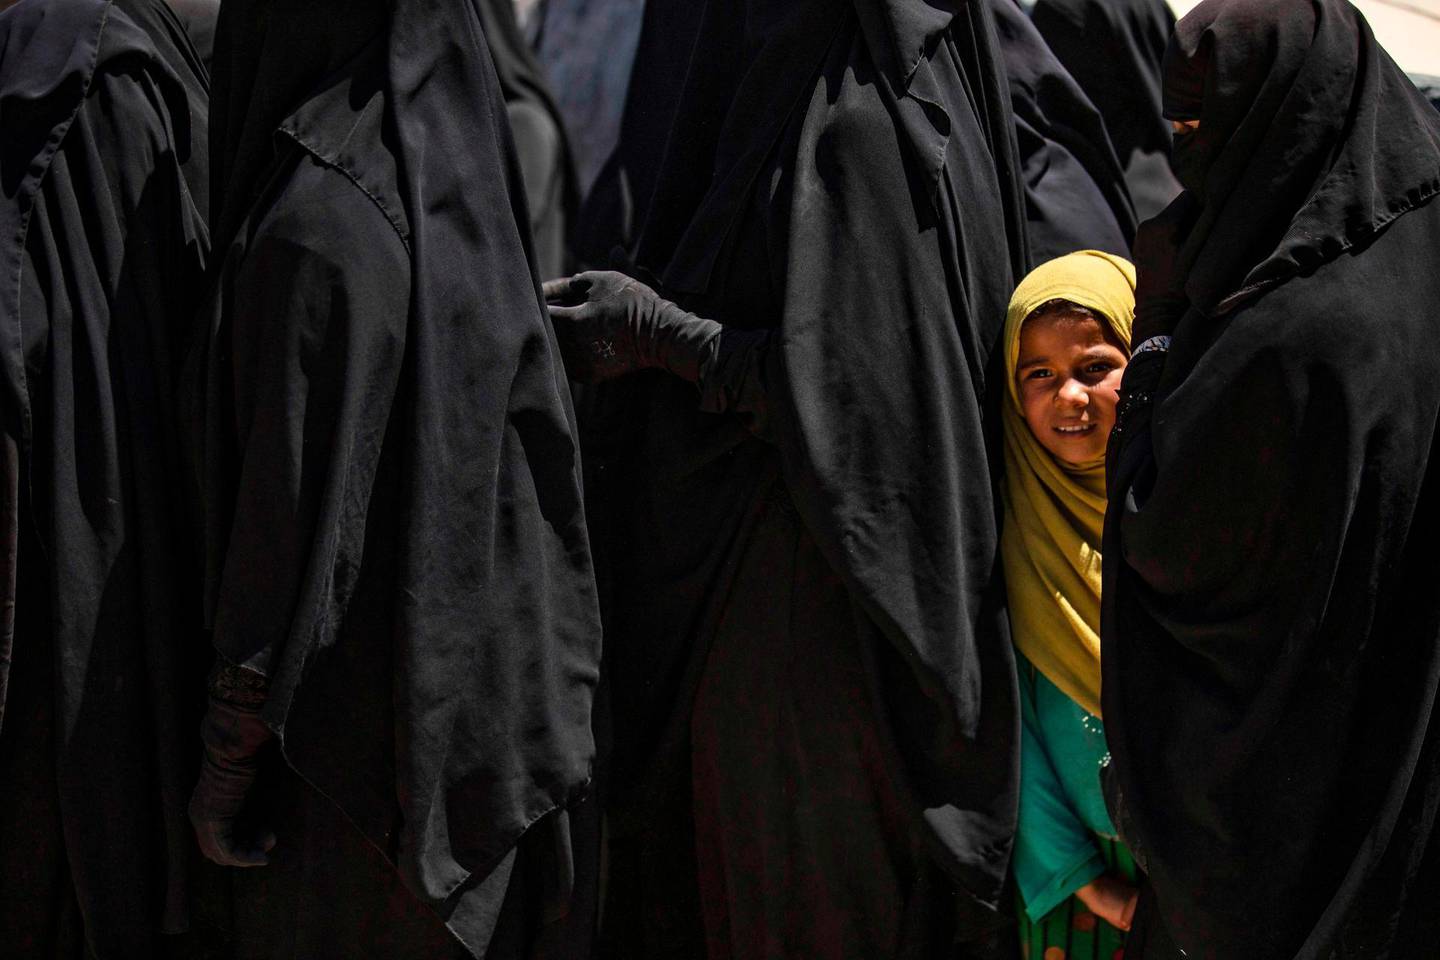 (FILES) In this file photo taken on August 18, 2020 a girl stands in line to receive aid with women at the Kurdish-run al-Hol camp in the al-Hasakeh governorate in northeastern Syria where families of Islamic State (IS) foreign fighters are held. The United States on August 31, 2020 vetoed a UN resolution on the fate of foreign jihadists which failed to include a call for their repatriation, diplomats said.
Drafted by Indonesia -- a non-permanent member of the Security Council -- the text drew support from 14 members, with the United States the only one to vote against.
 / AFP / Delil SOULEIMAN
